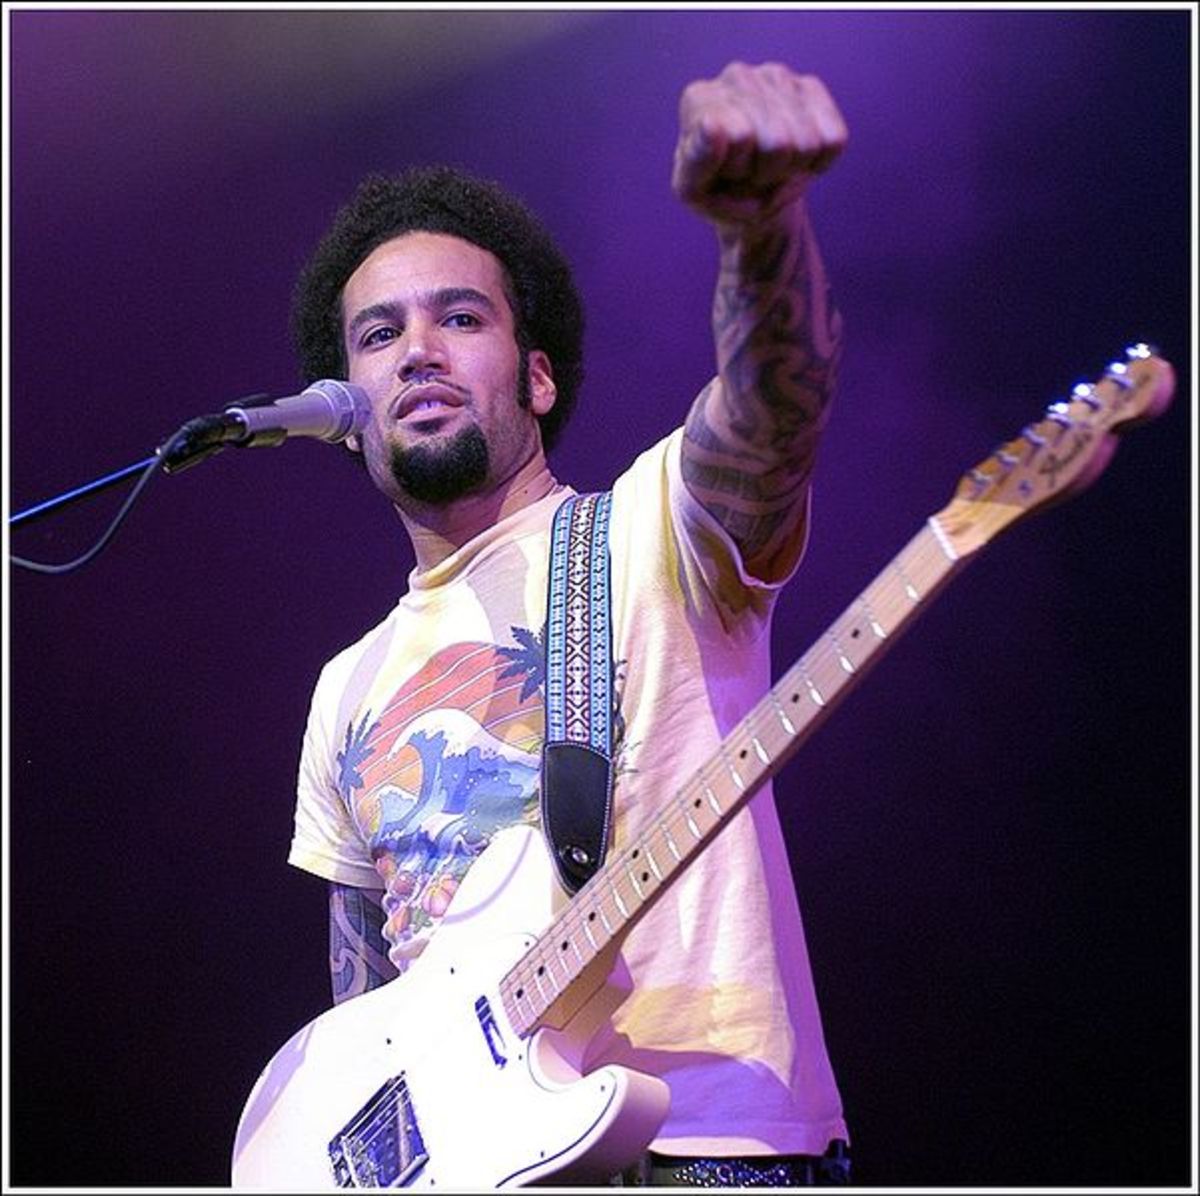 Singer-songwriter Ben Harper has written and performed a number of socially conscious songs over the years. 